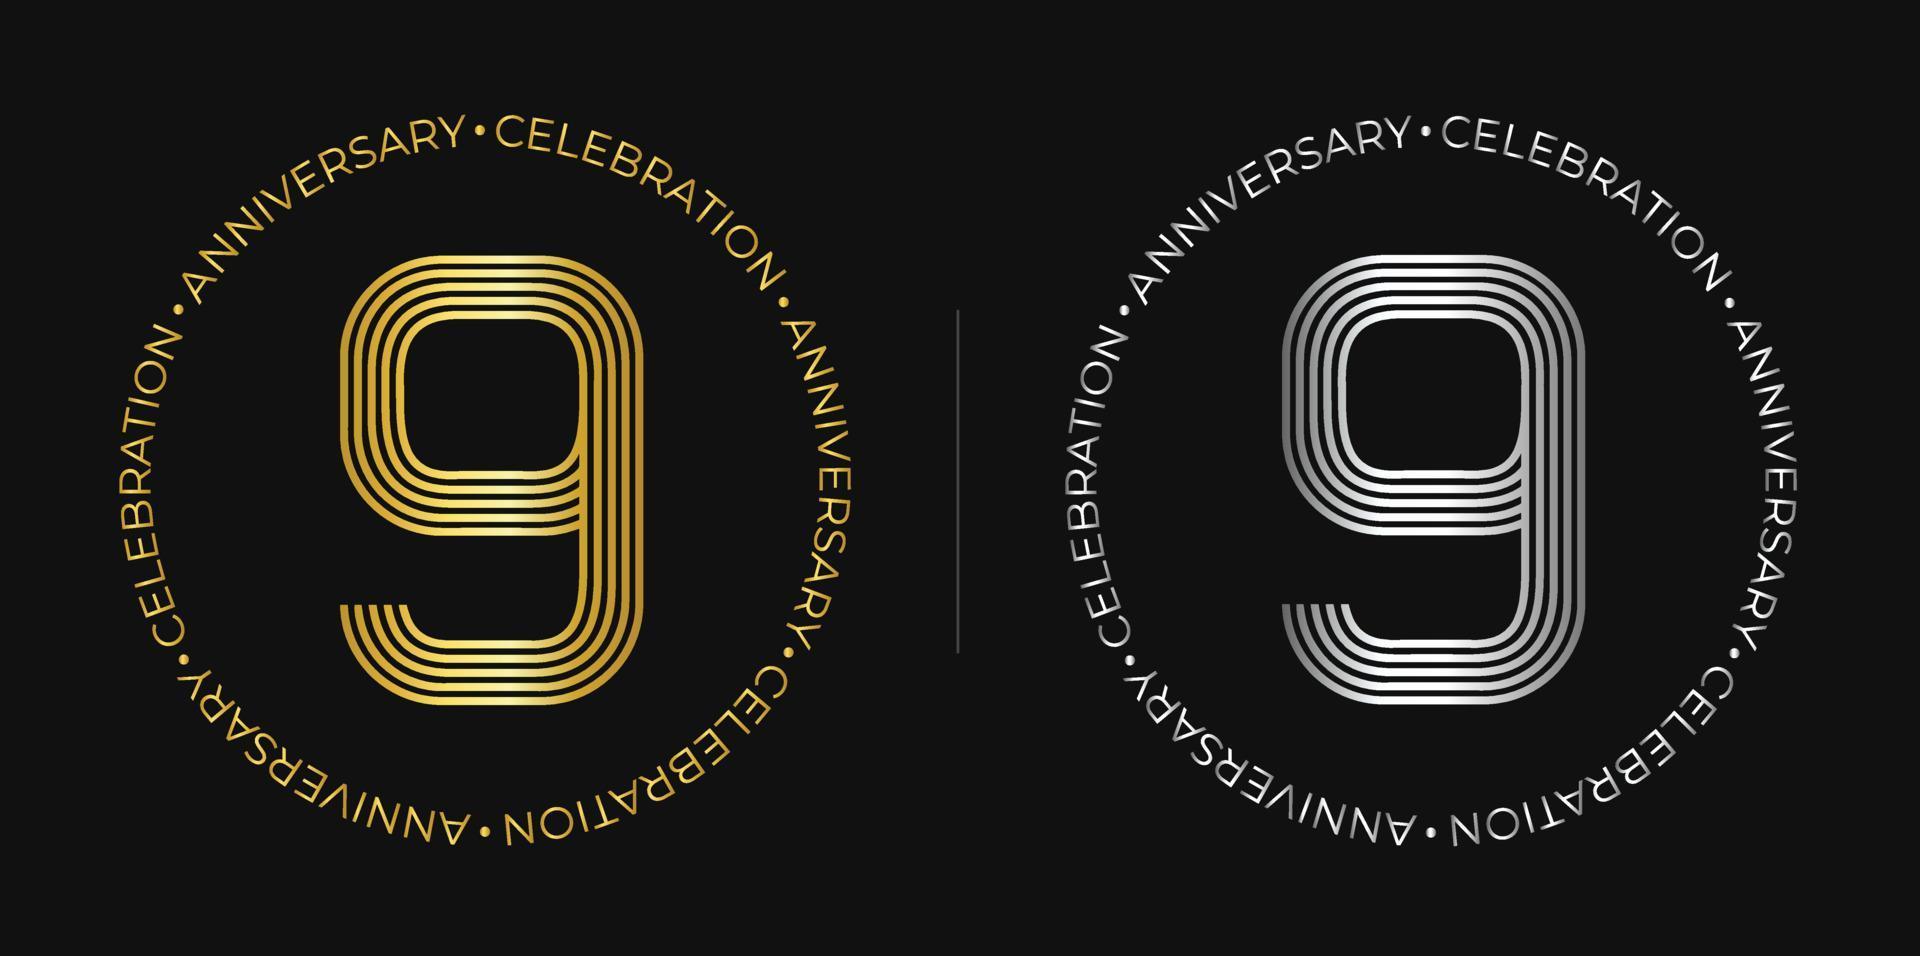 9th birthday.Nine years anniversary celebration banner in golden and silver colors. Circular logo with original number design in elegant lines. vector